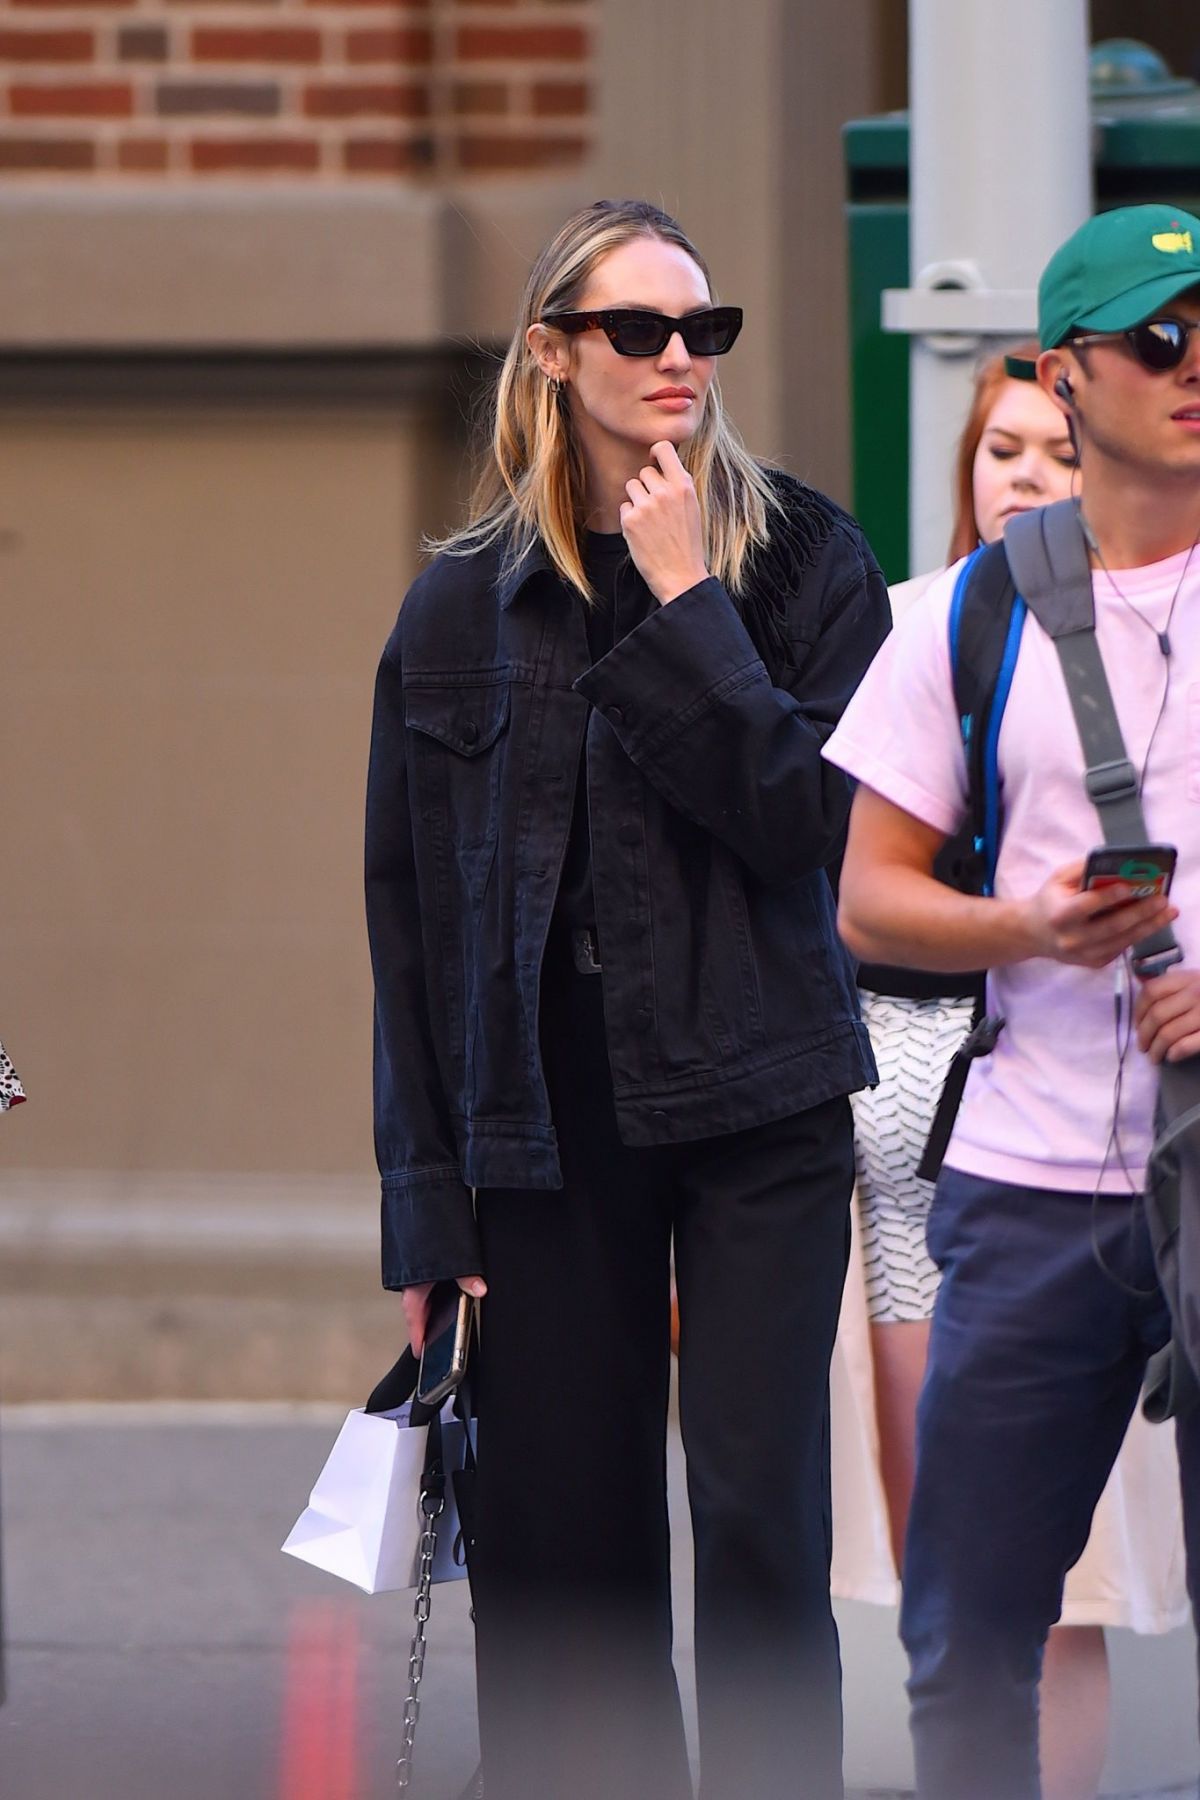 candice-swanepoel-out-and-about-in-new-york-04-24-2019-8.jpg